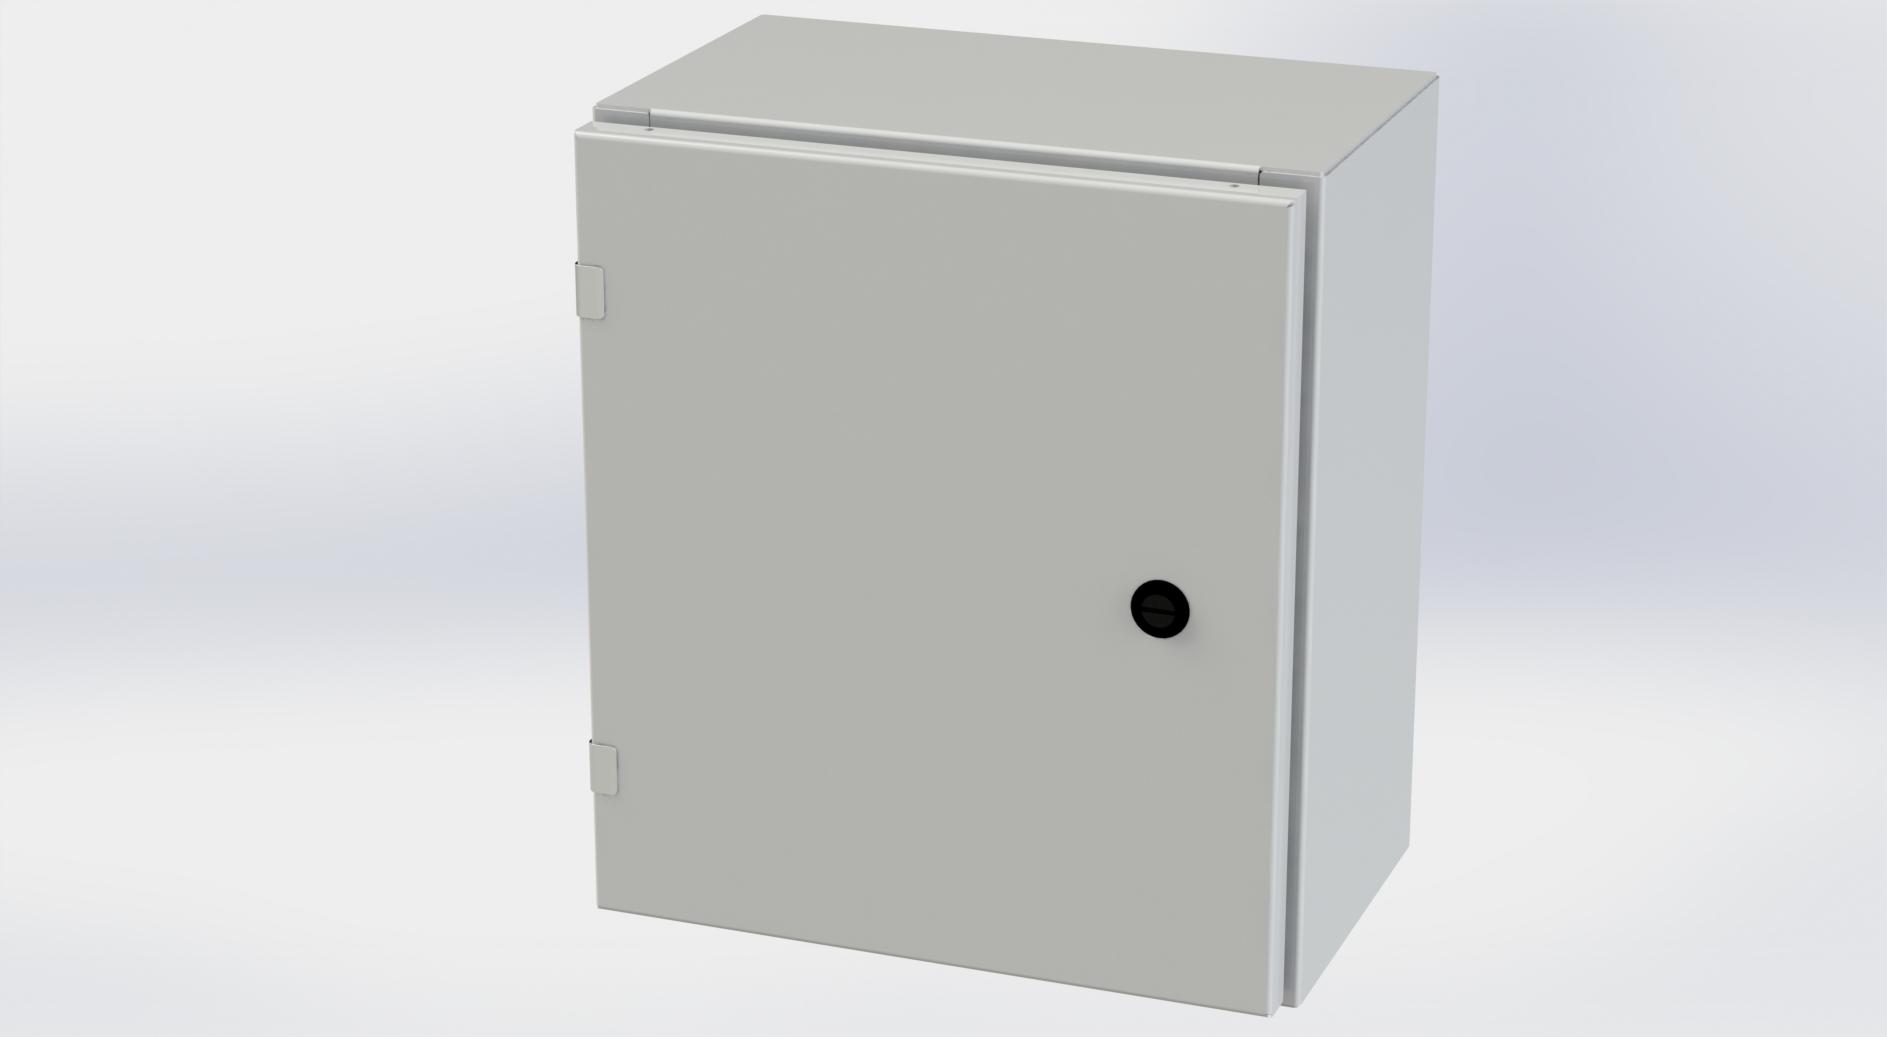 Saginaw Control SCE-16EL1408LPLG EL Enclosure, Height:16.00", Width:14.00", Depth:8.00", RAL 7035 gray powder coating inside and out. Optional sub-panels are powder coated white.